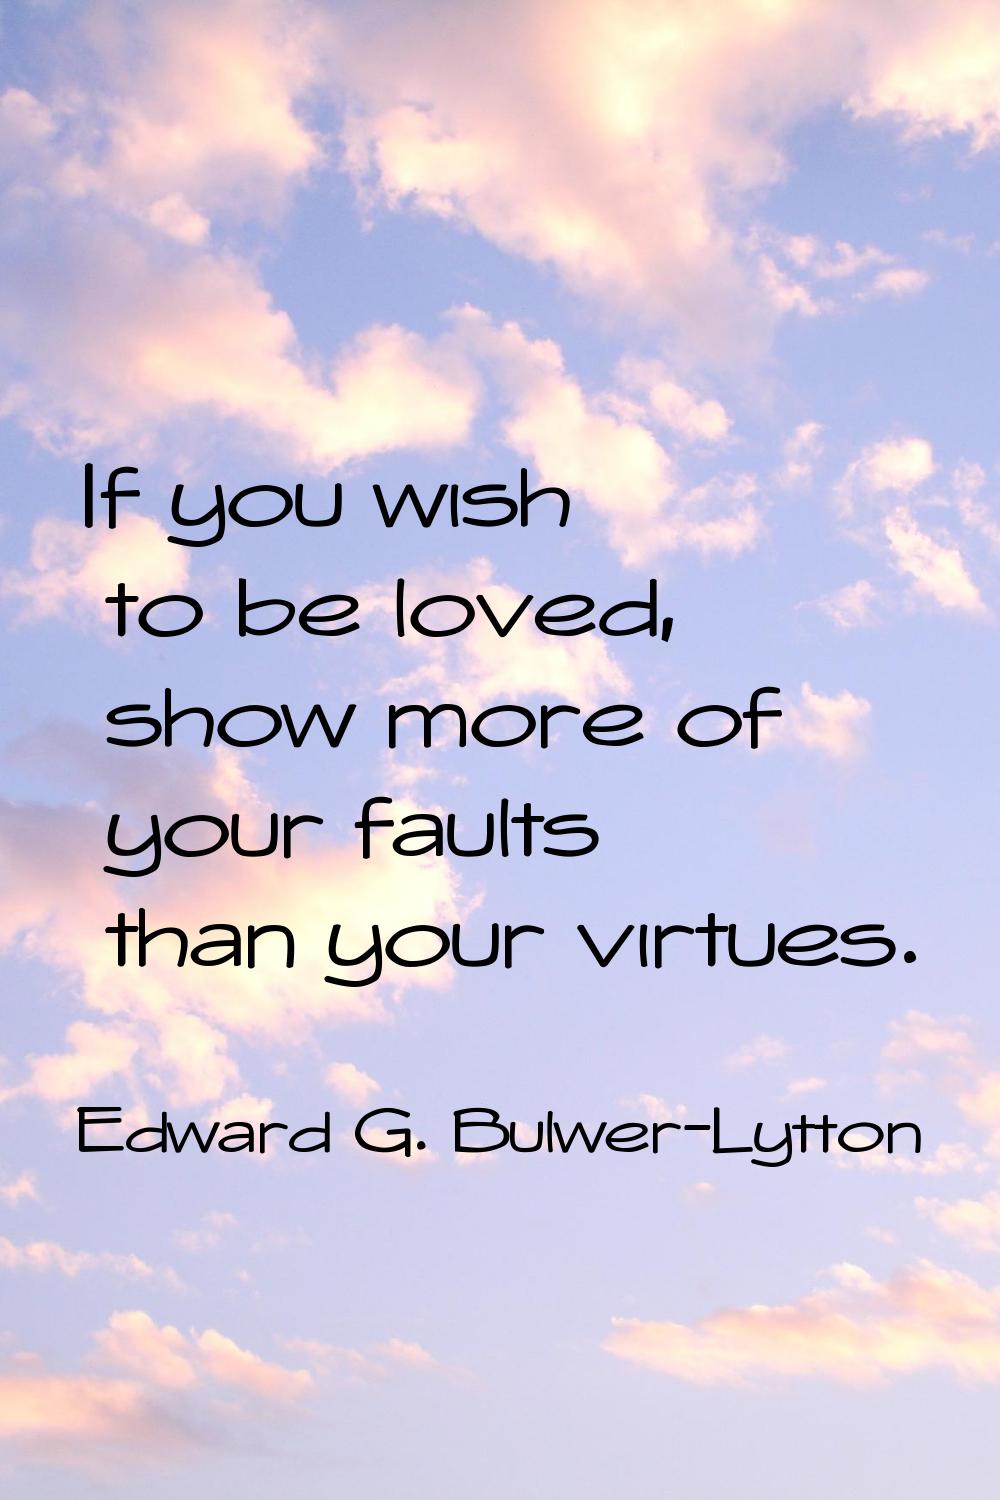 If you wish to be loved, show more of your faults than your virtues.